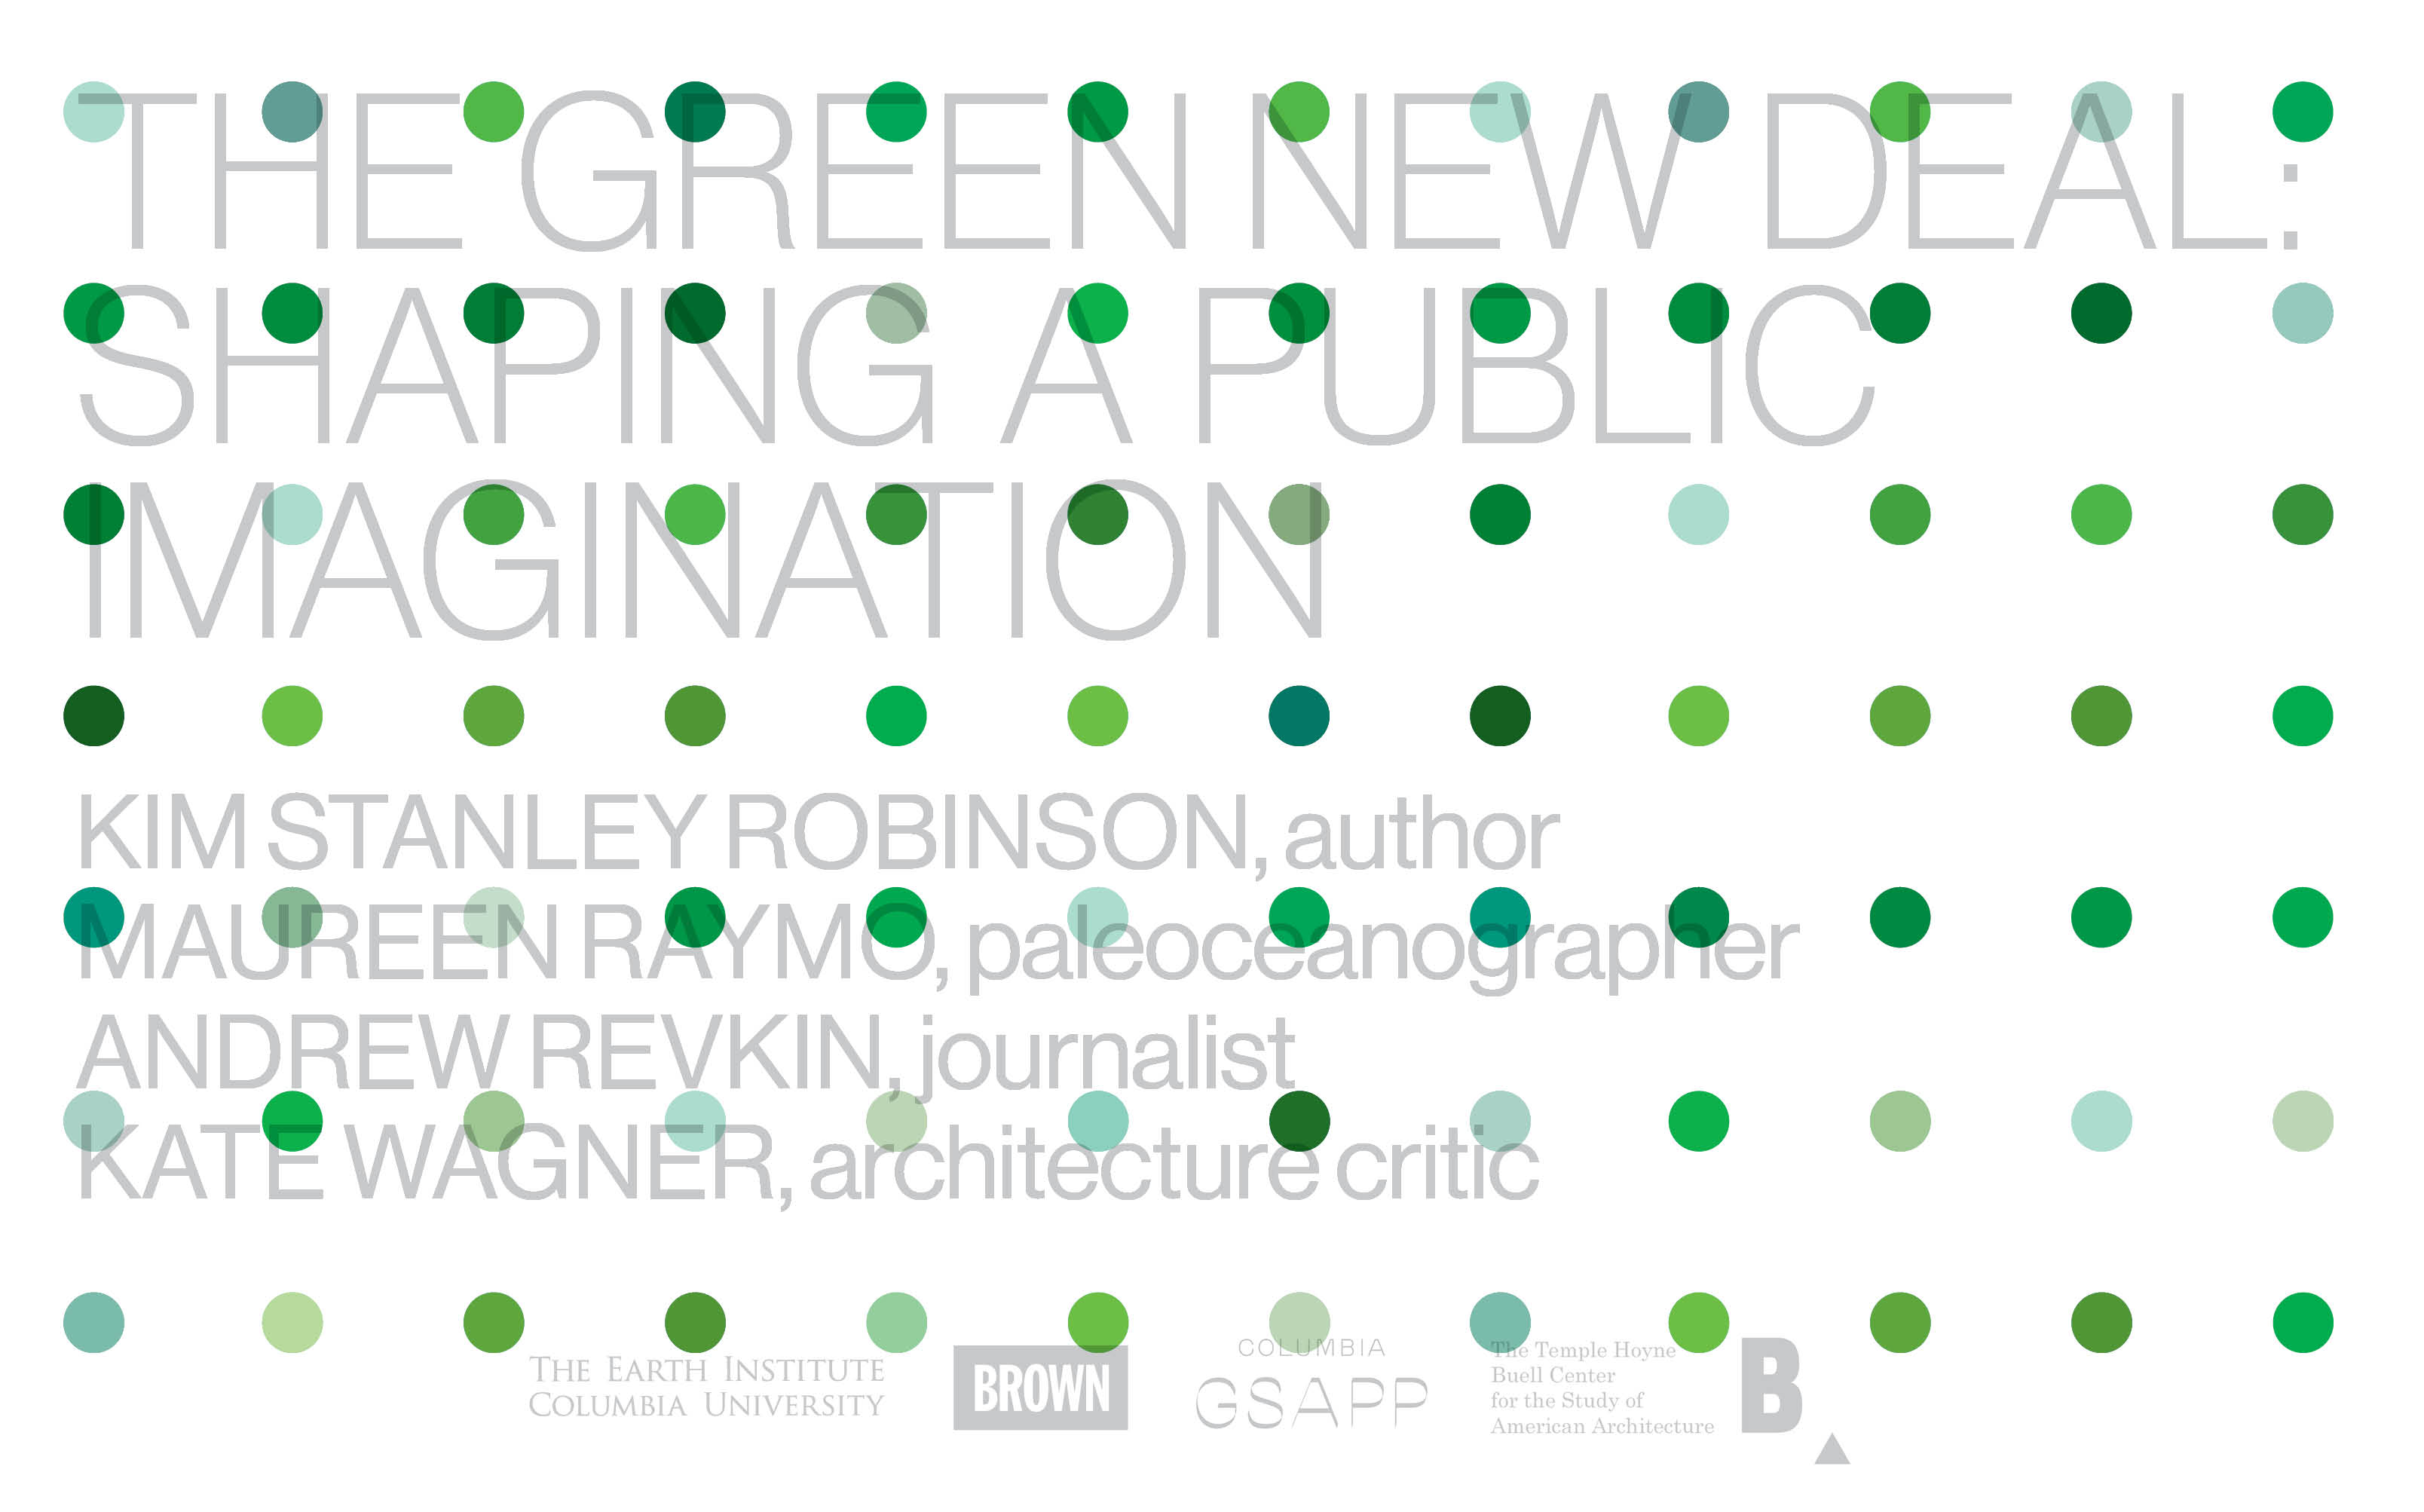 A grid of variously green dots overlays grey text with the event title, participant names, and sponsoring institution logos